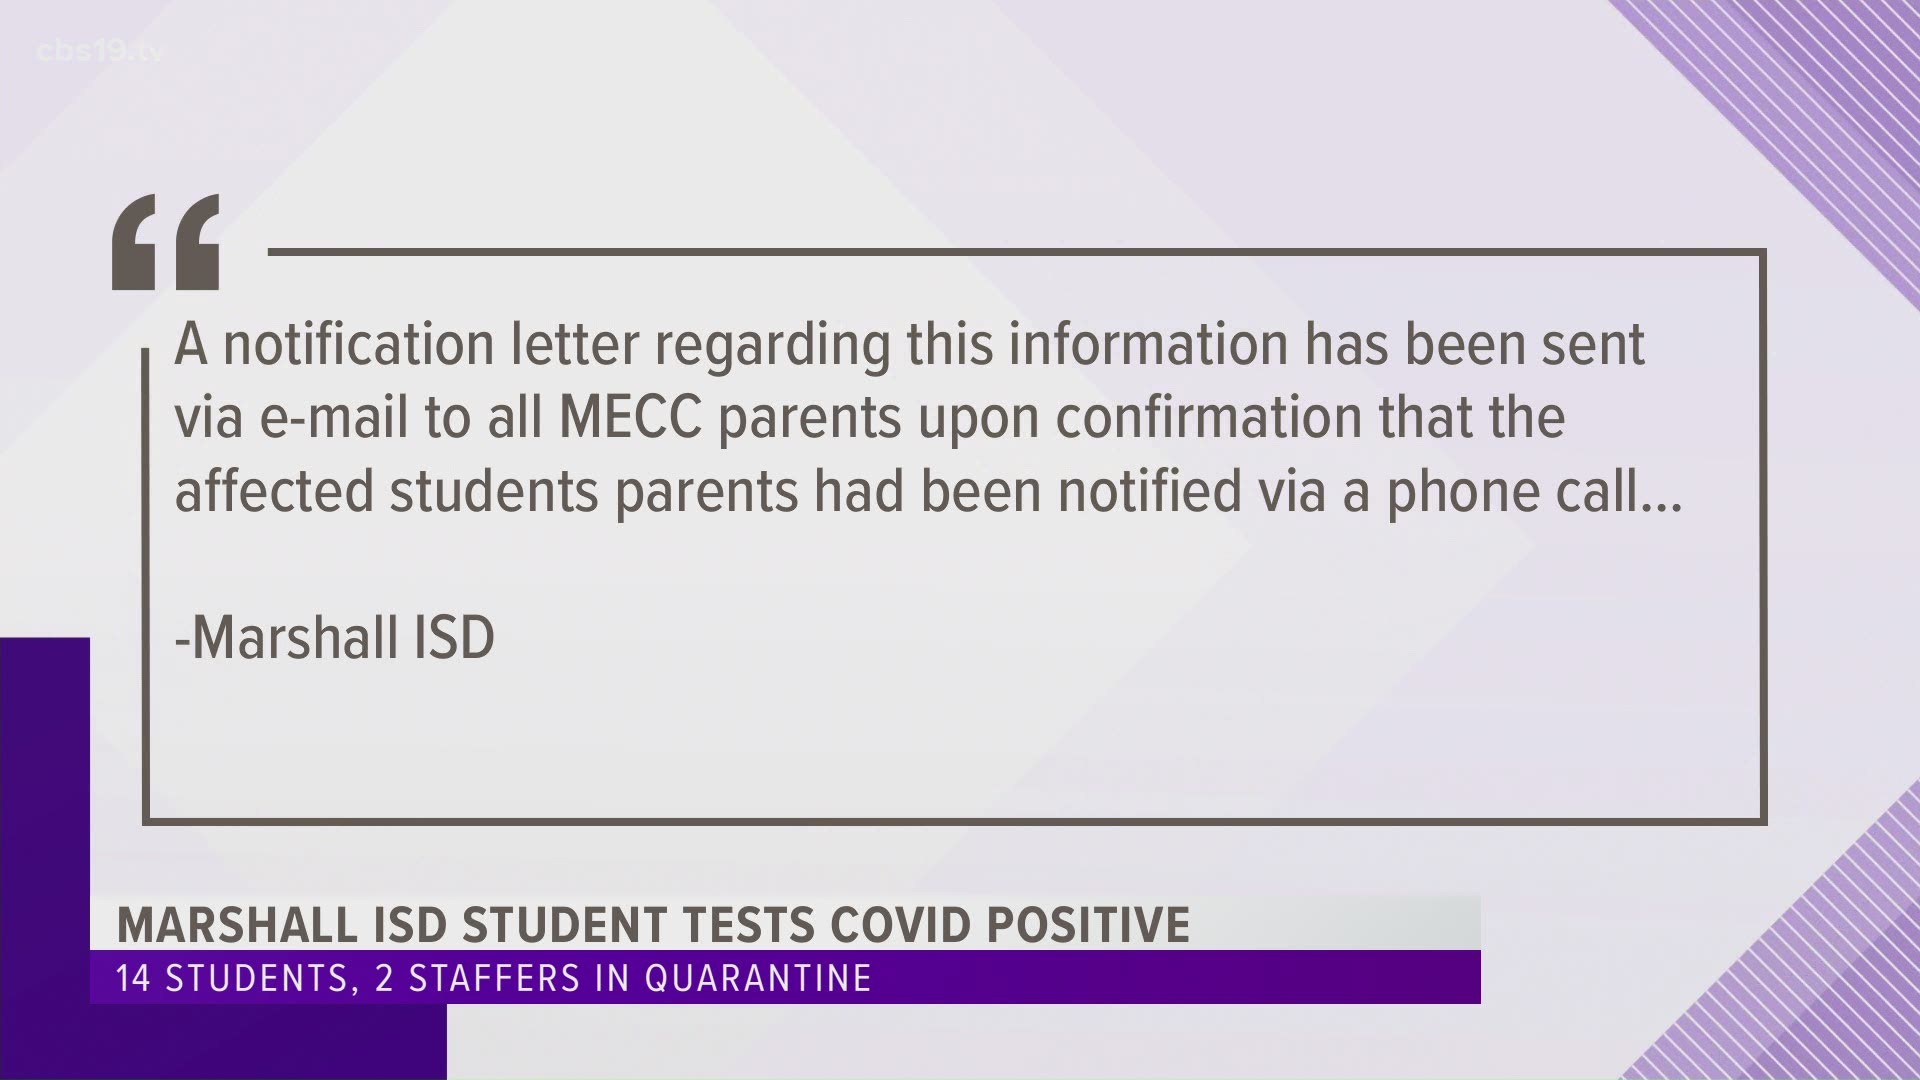 The district reached out to the families of children who may have been exposed. In all, 14 students and 2 staff members are in quarantine.